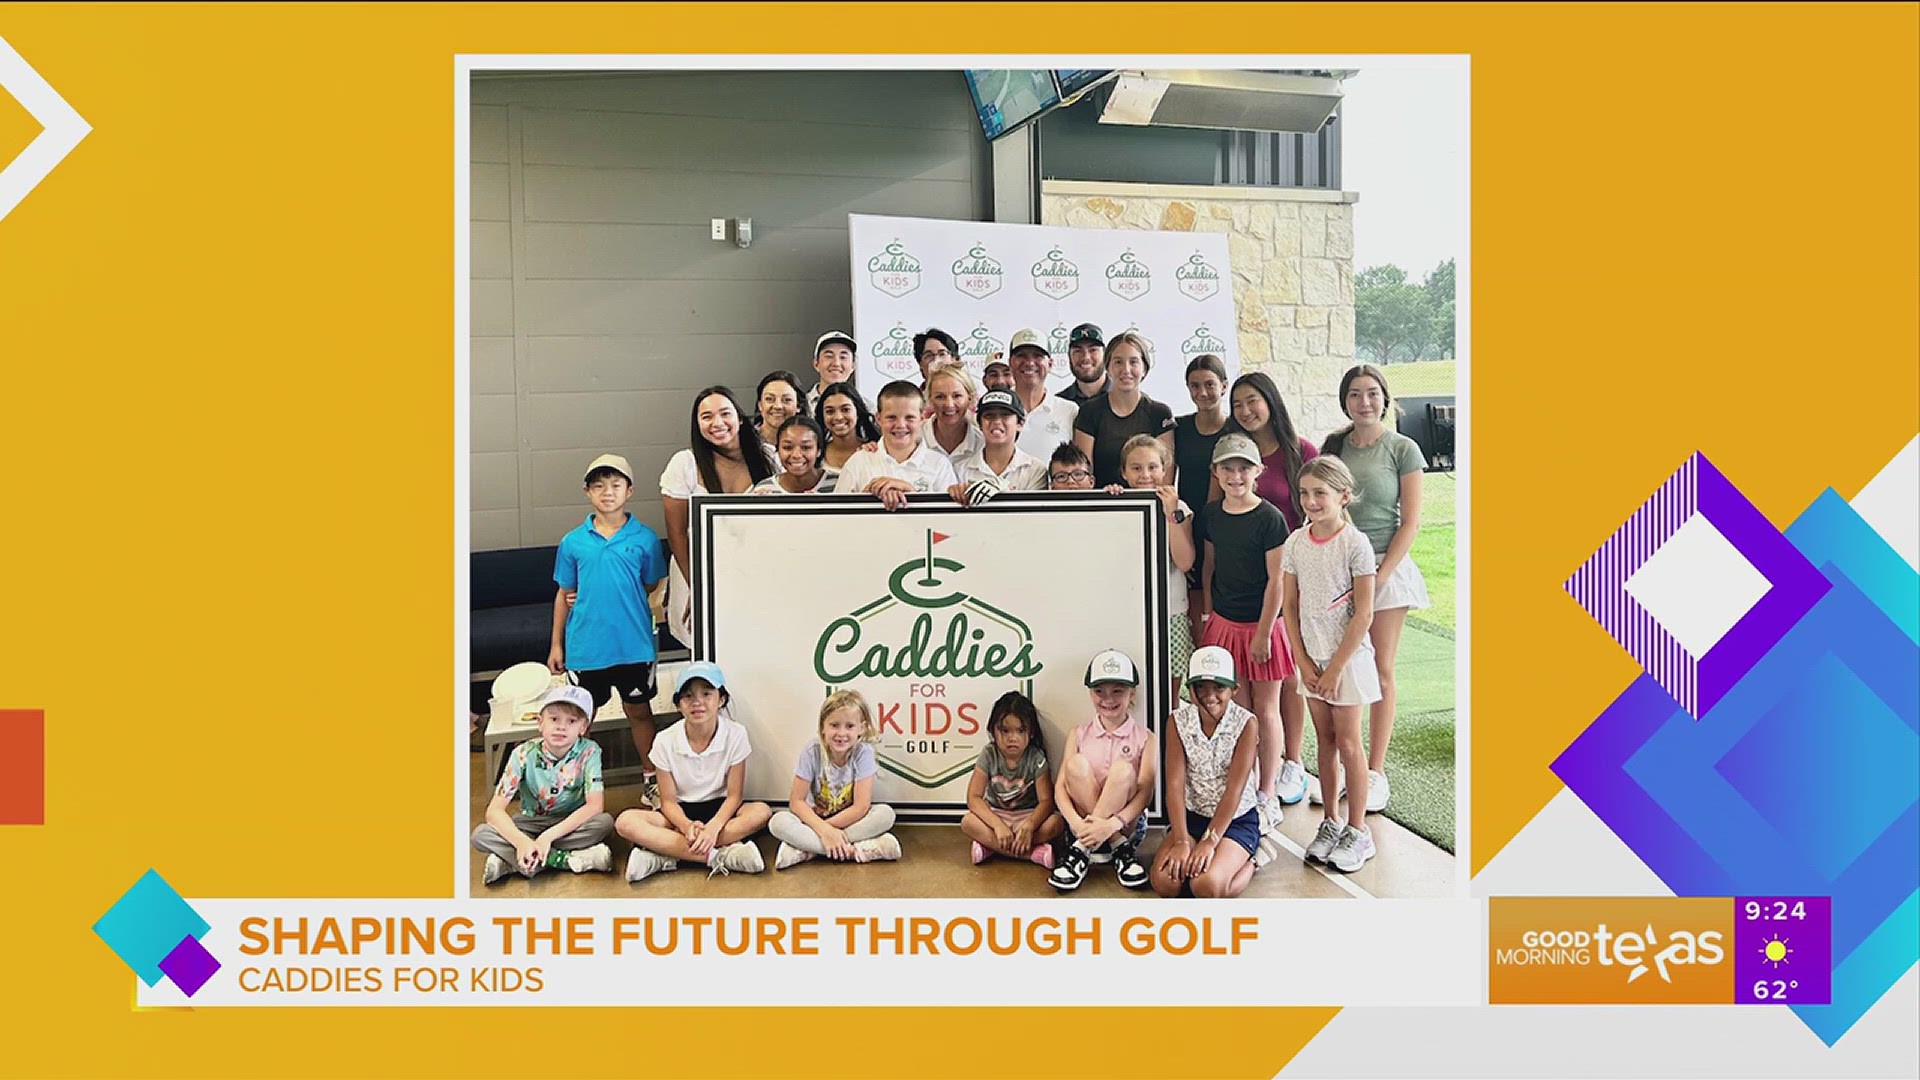 Caddies For Kids Co-Founders Shelby and Mike Tomaso tell us about their program that pairs junior golfers with high school caddies.